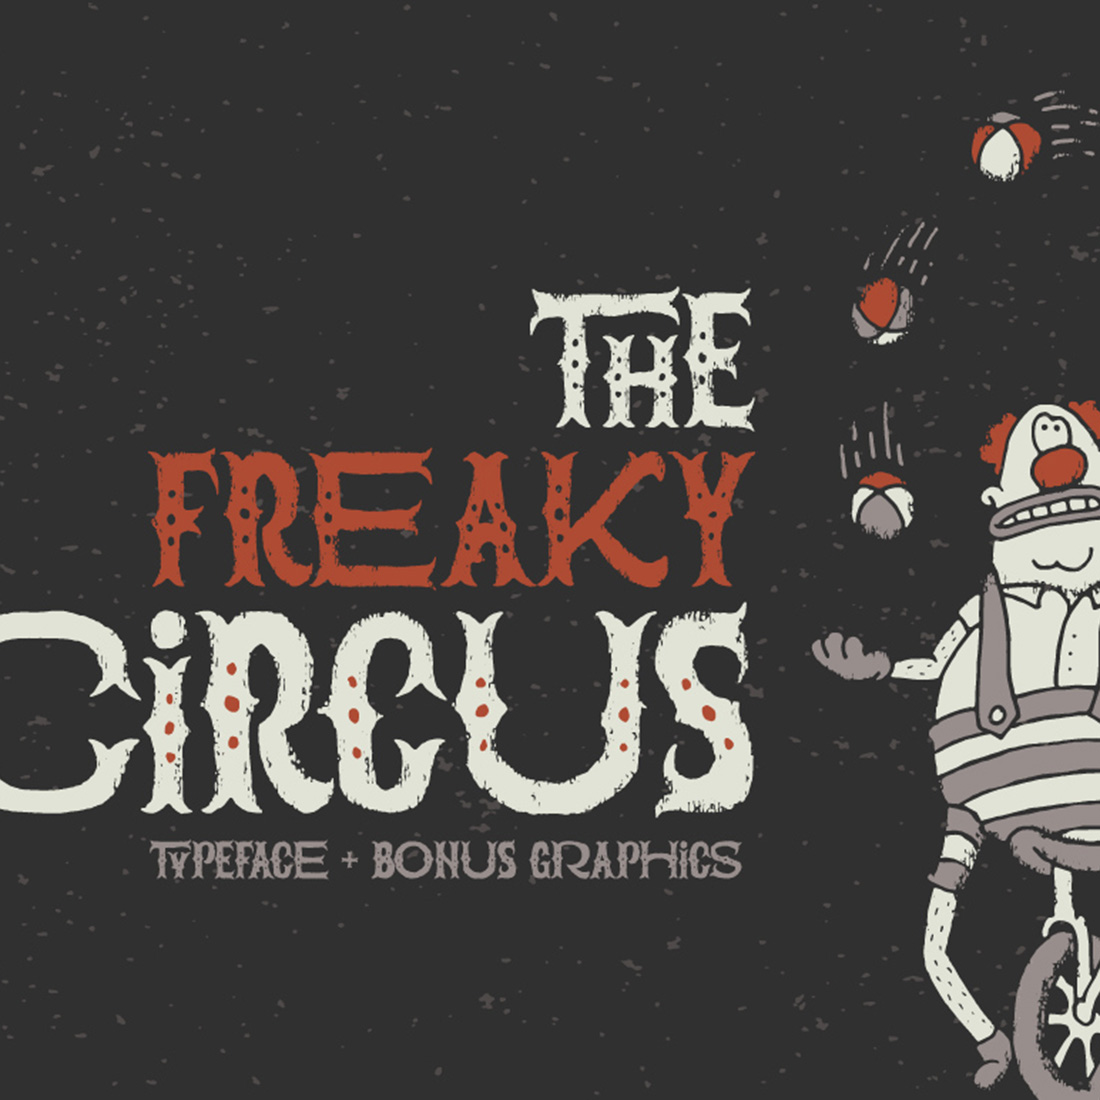 The Freaky Circus Font main cover.